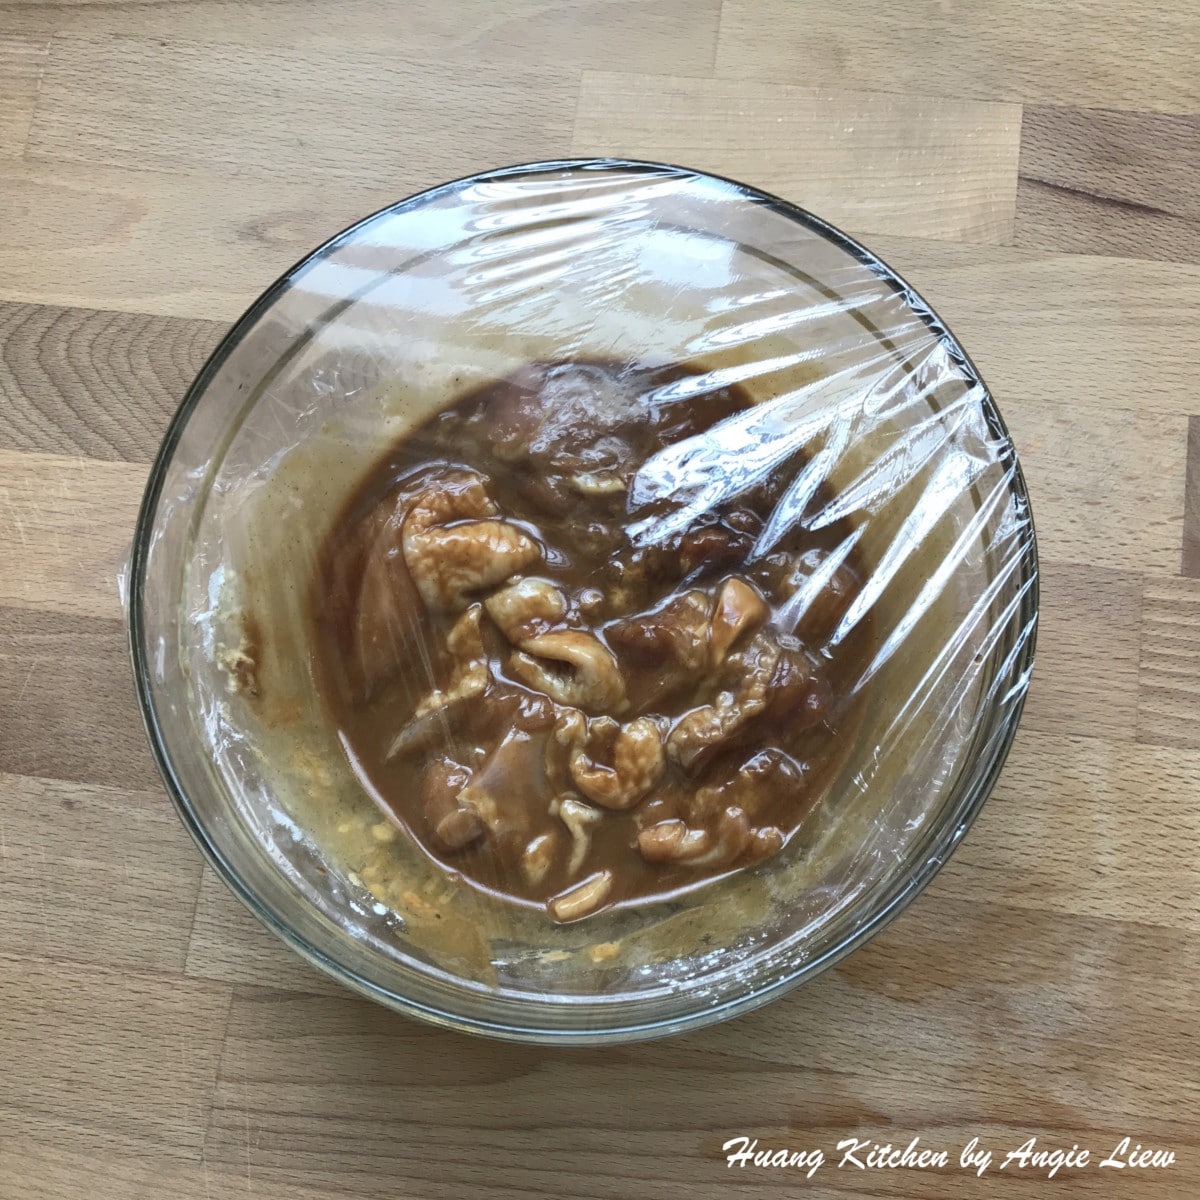 Marinade chicken for at least 3 hours.